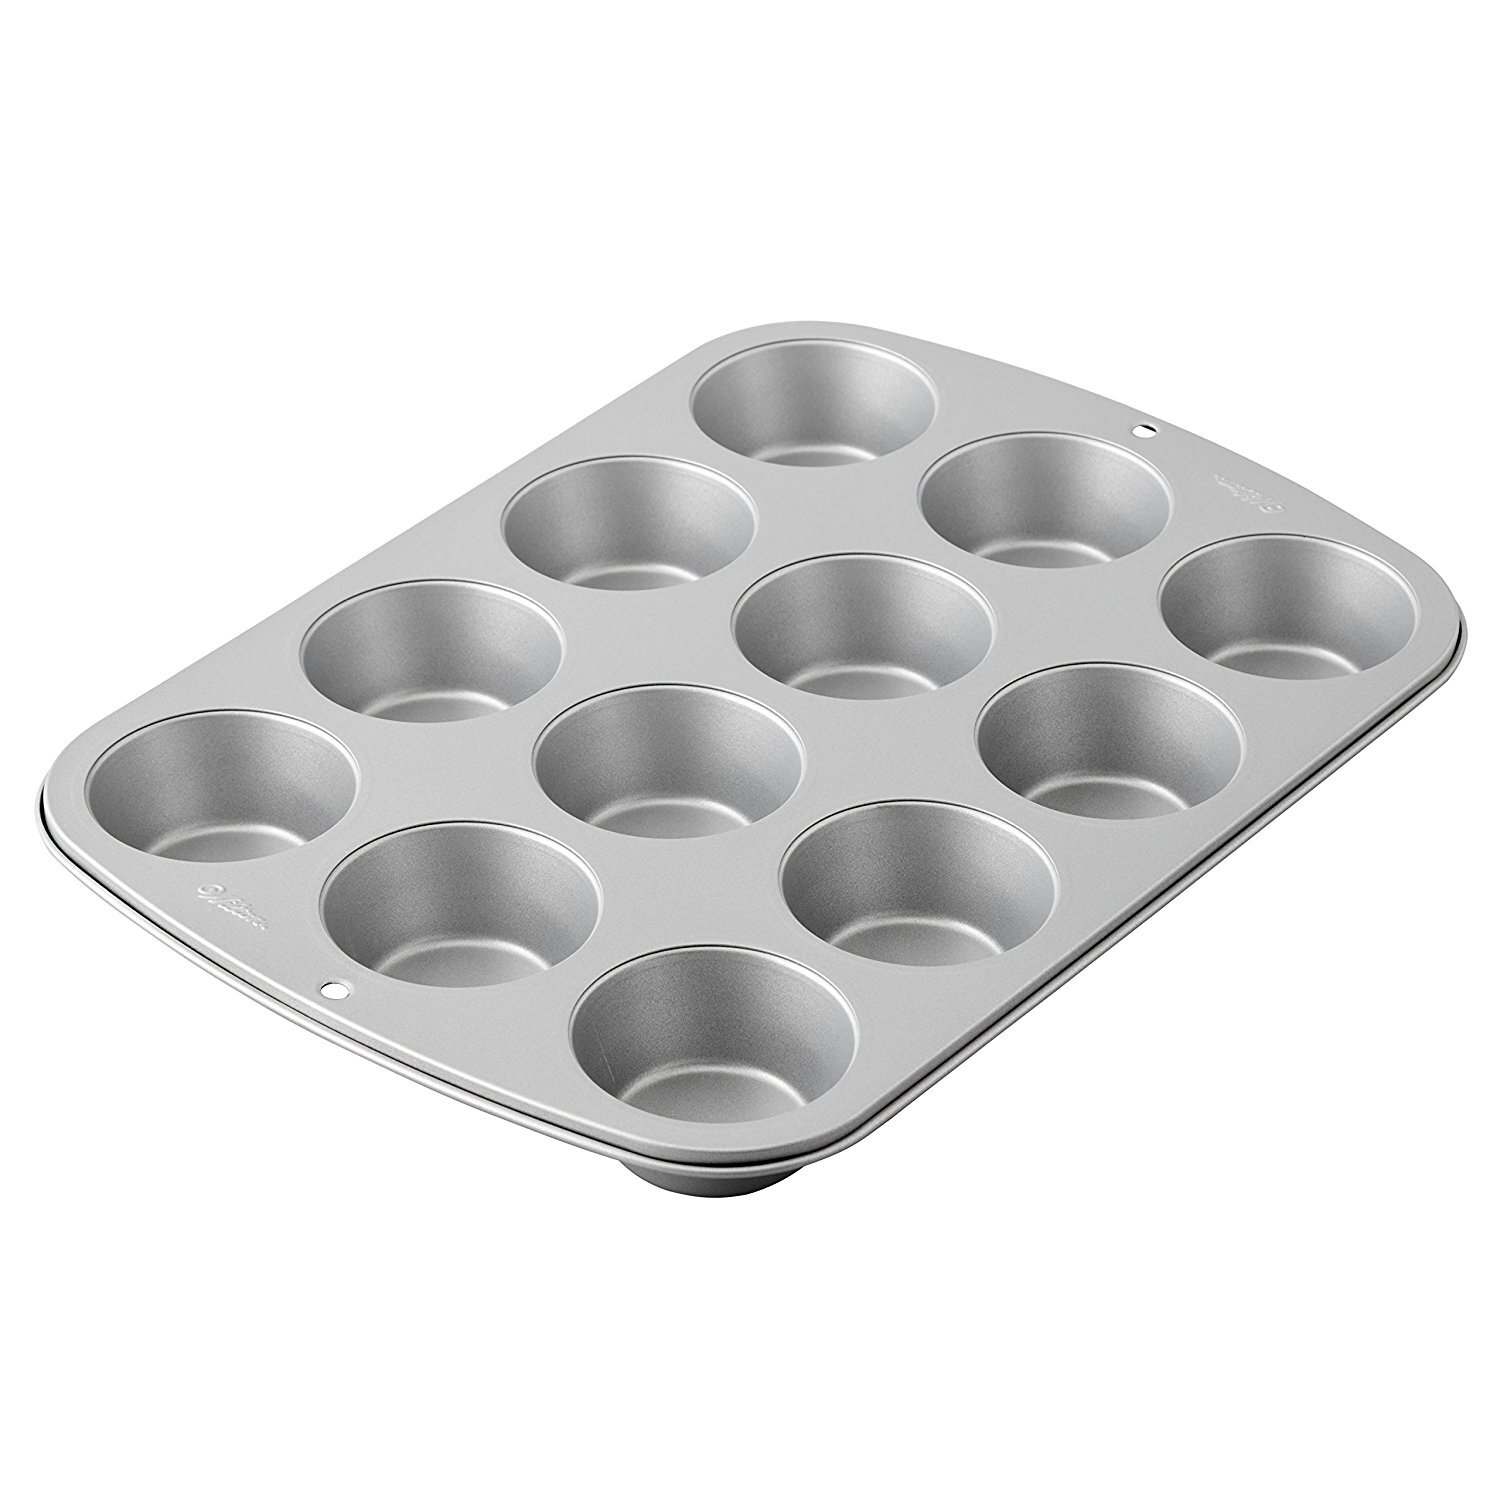 Wilton Nonstick Cookie Sheet, Muffin Pan, Oblong Pan and Cover Bakeware Set, 4-Piece, Silver